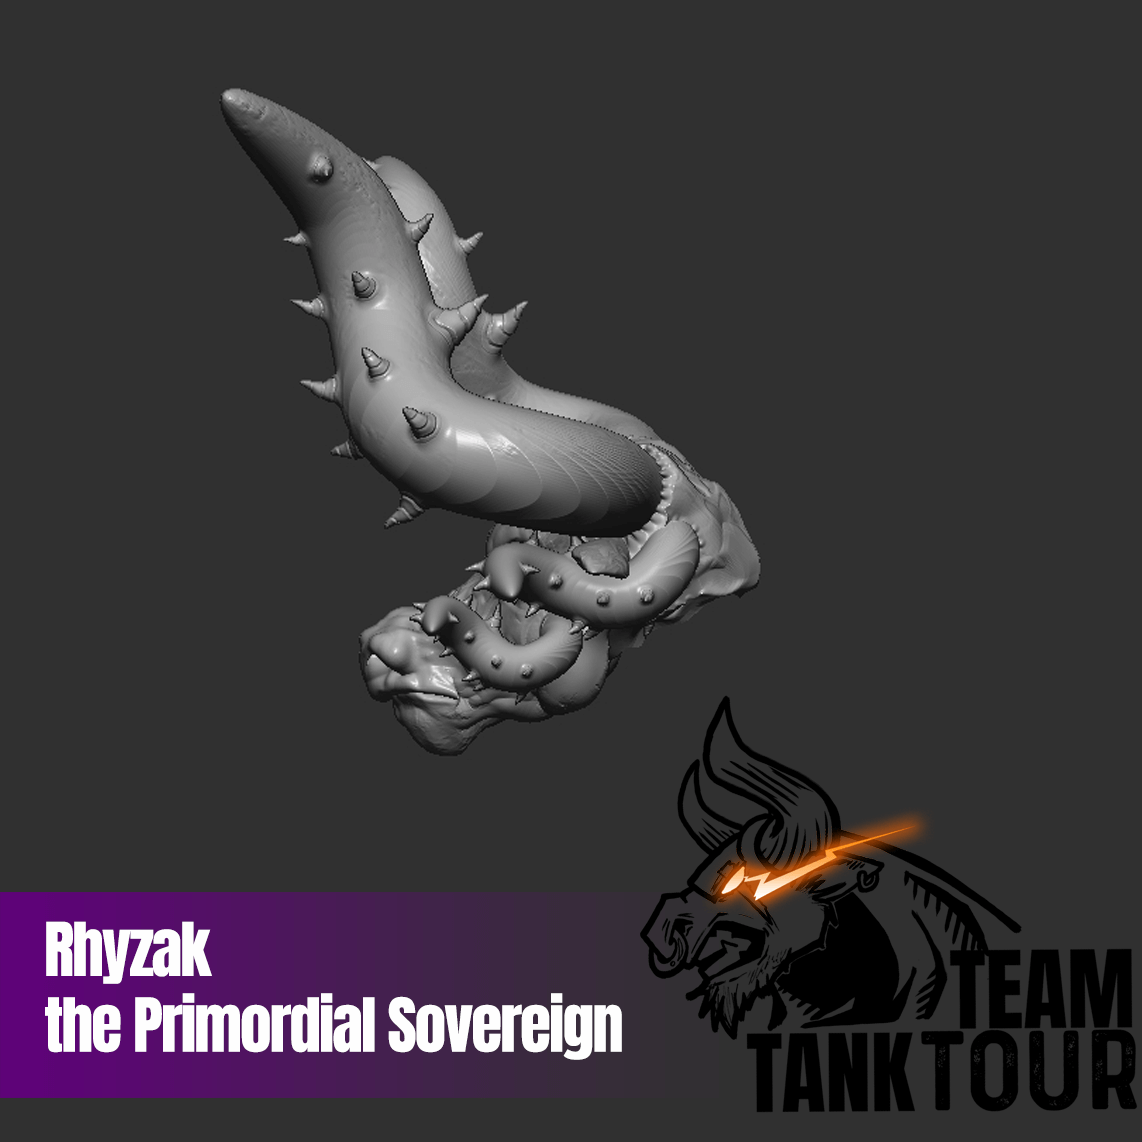 Rhyzak, the Primordial Sovereign (God Form) 3D Printed Head (9 Inch - Ogre Scale)